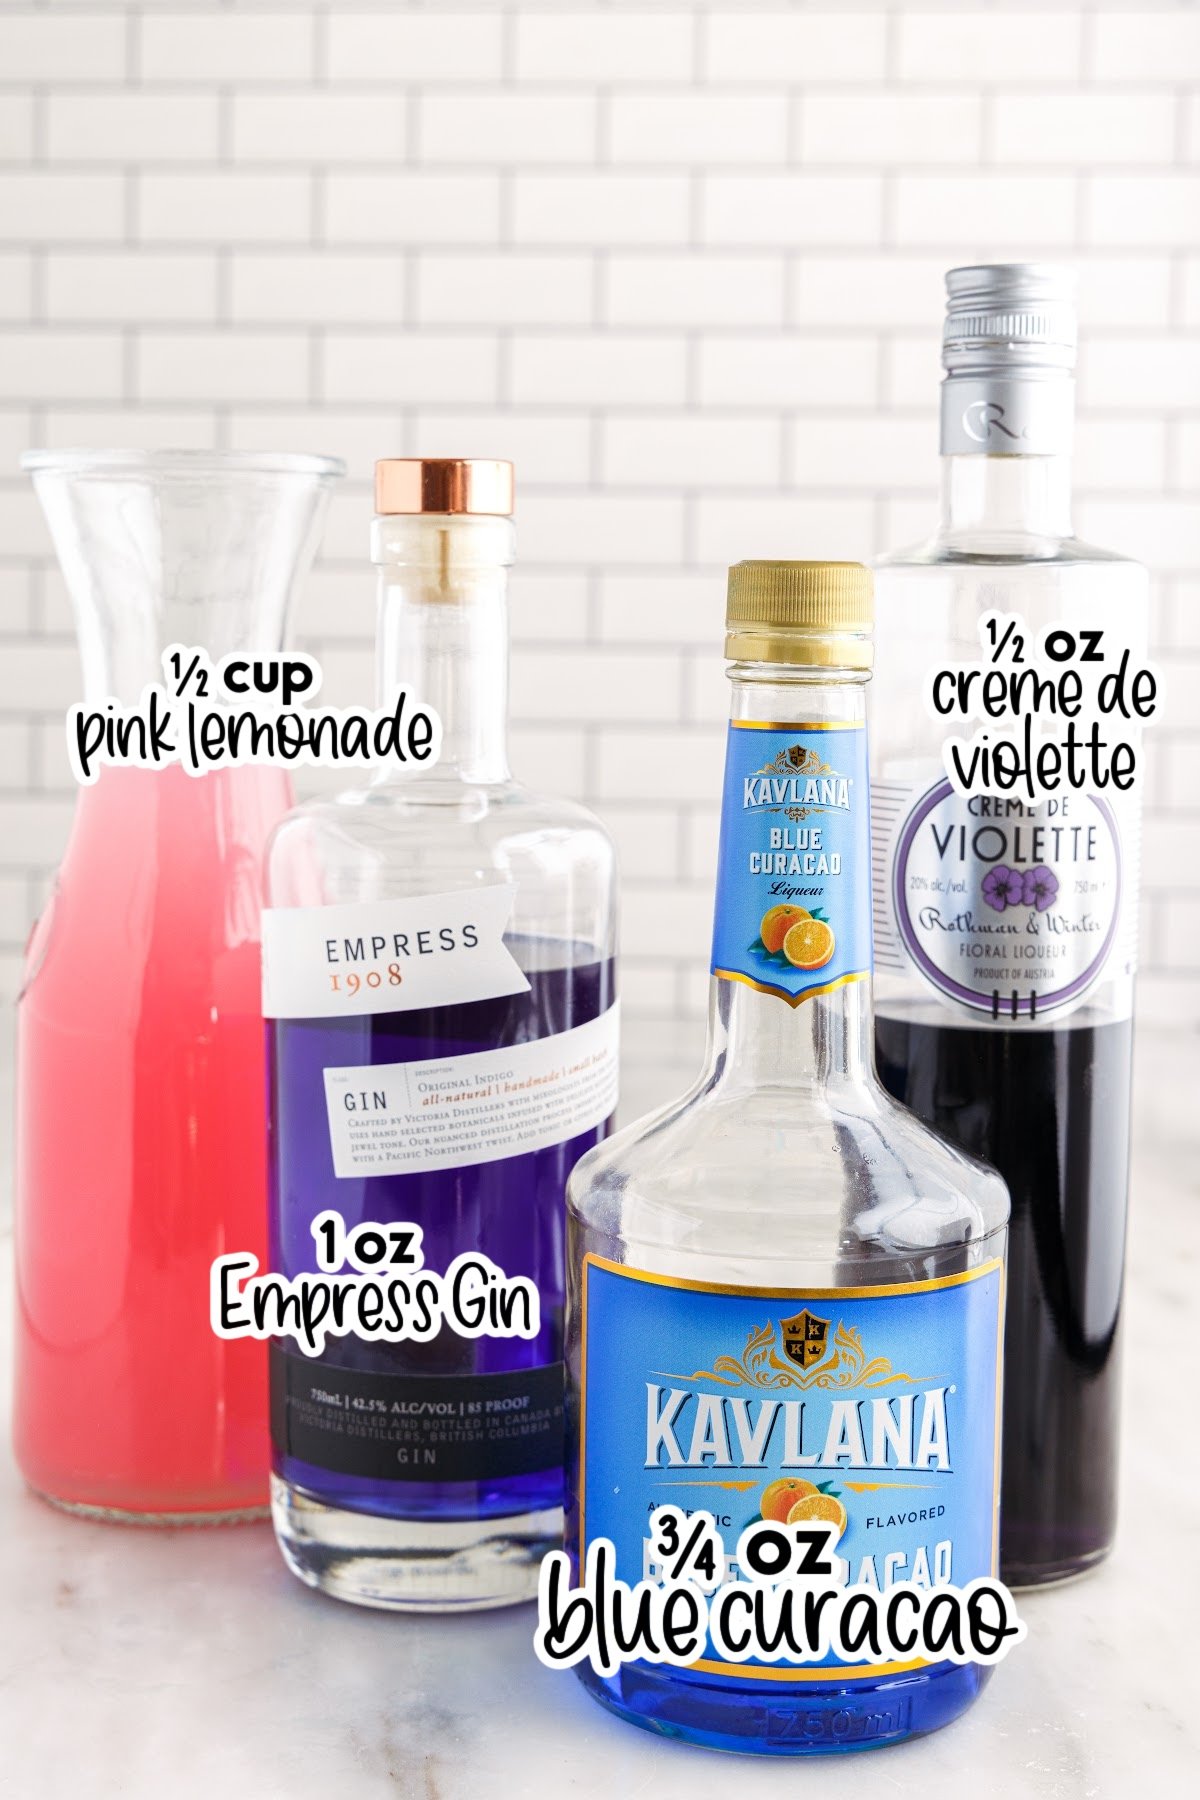 All ingredients to make this cocktail on the counter, with text overlays.